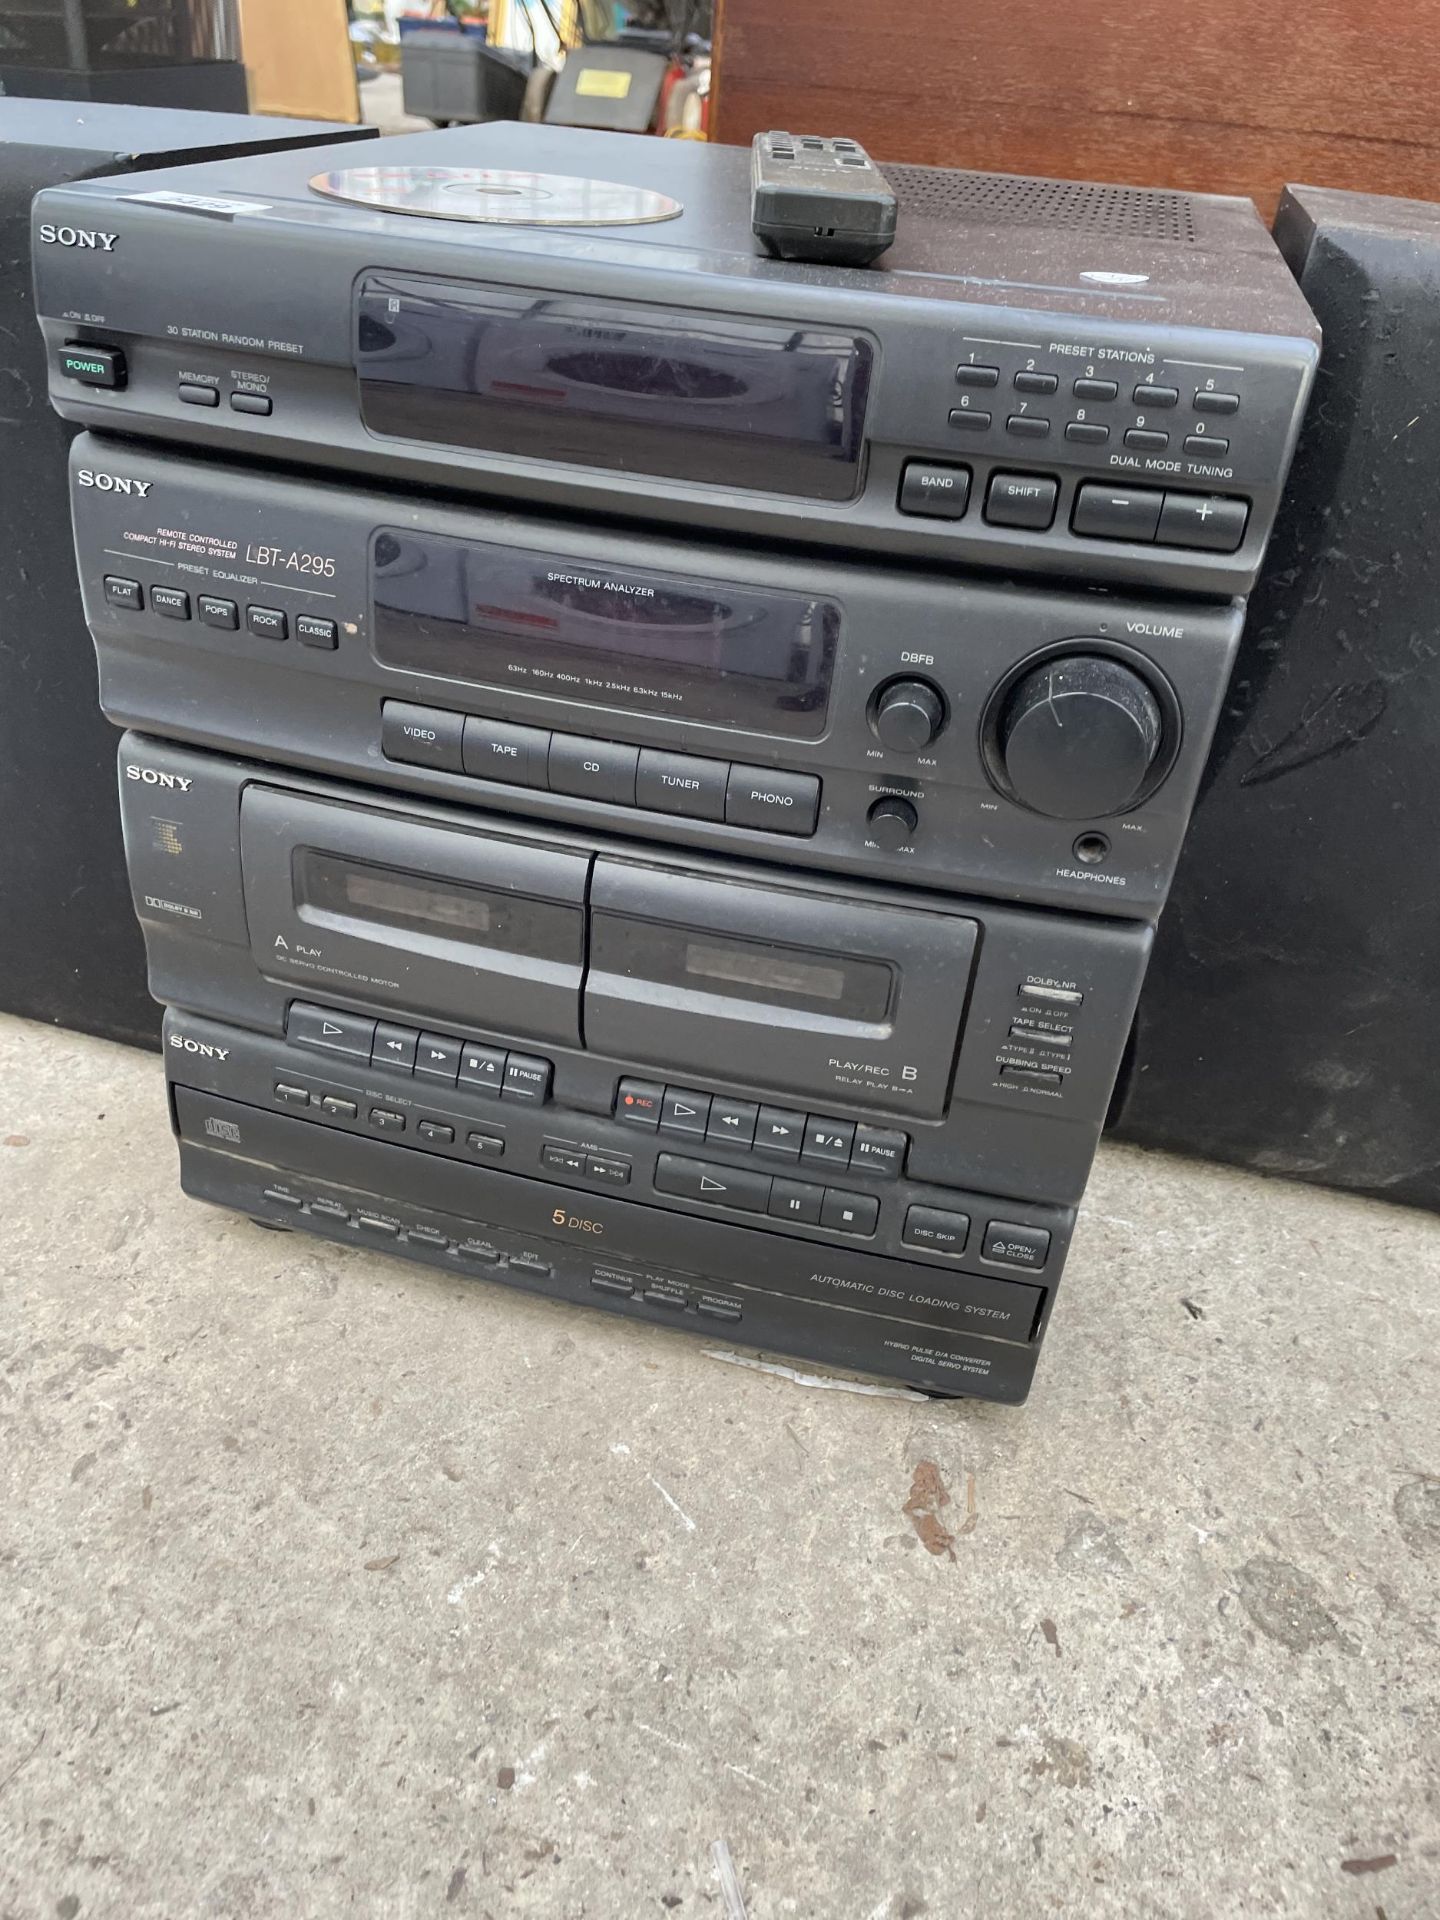 A SONY STEREO SYSTEM WITH A PAIR OF SPEAKERS - Image 2 of 2